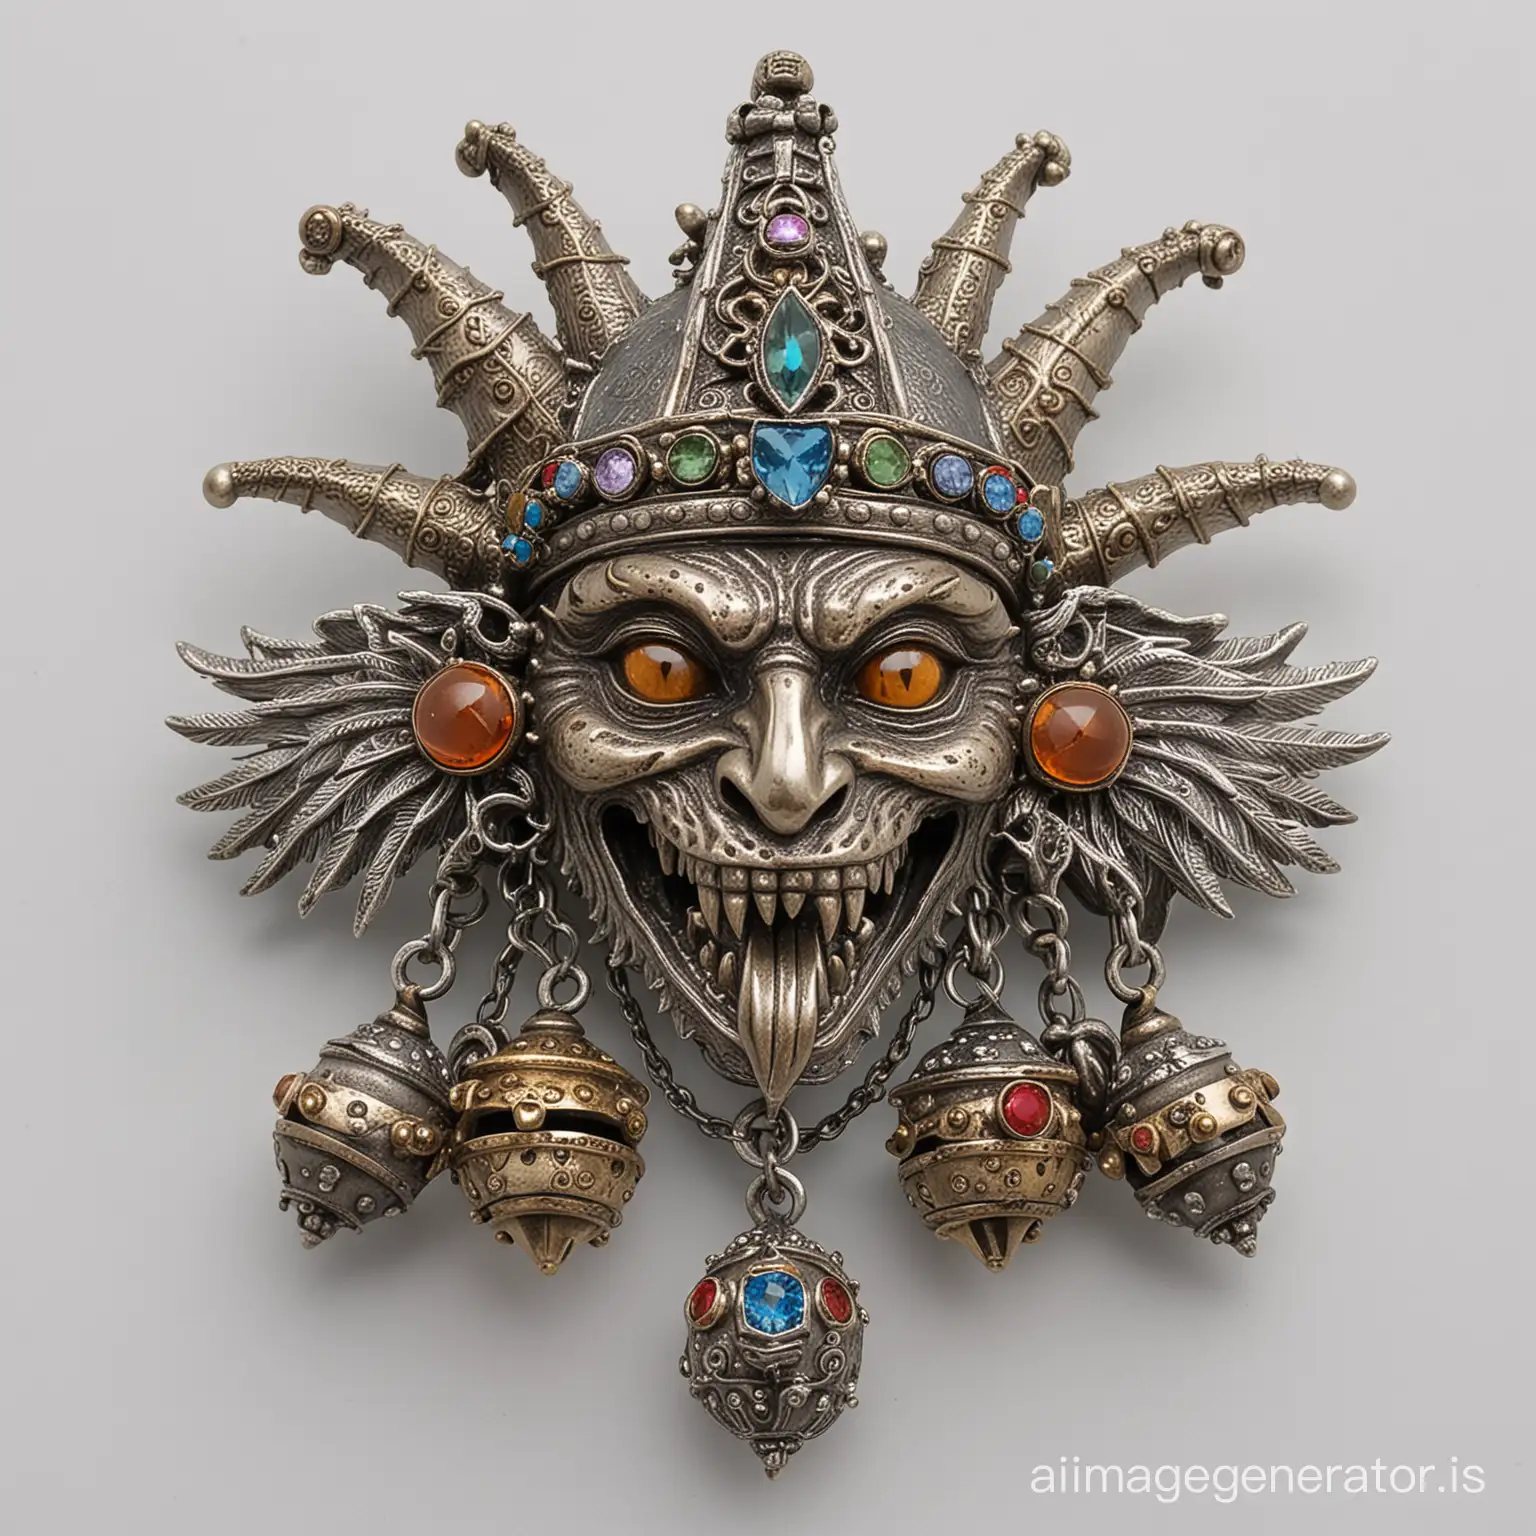 Patinated, Bejewelled, medieval brooch featuring a mad dragon face wearing a jesters hat with bells, feathers and charms, as king in old silver and bronze on a white background